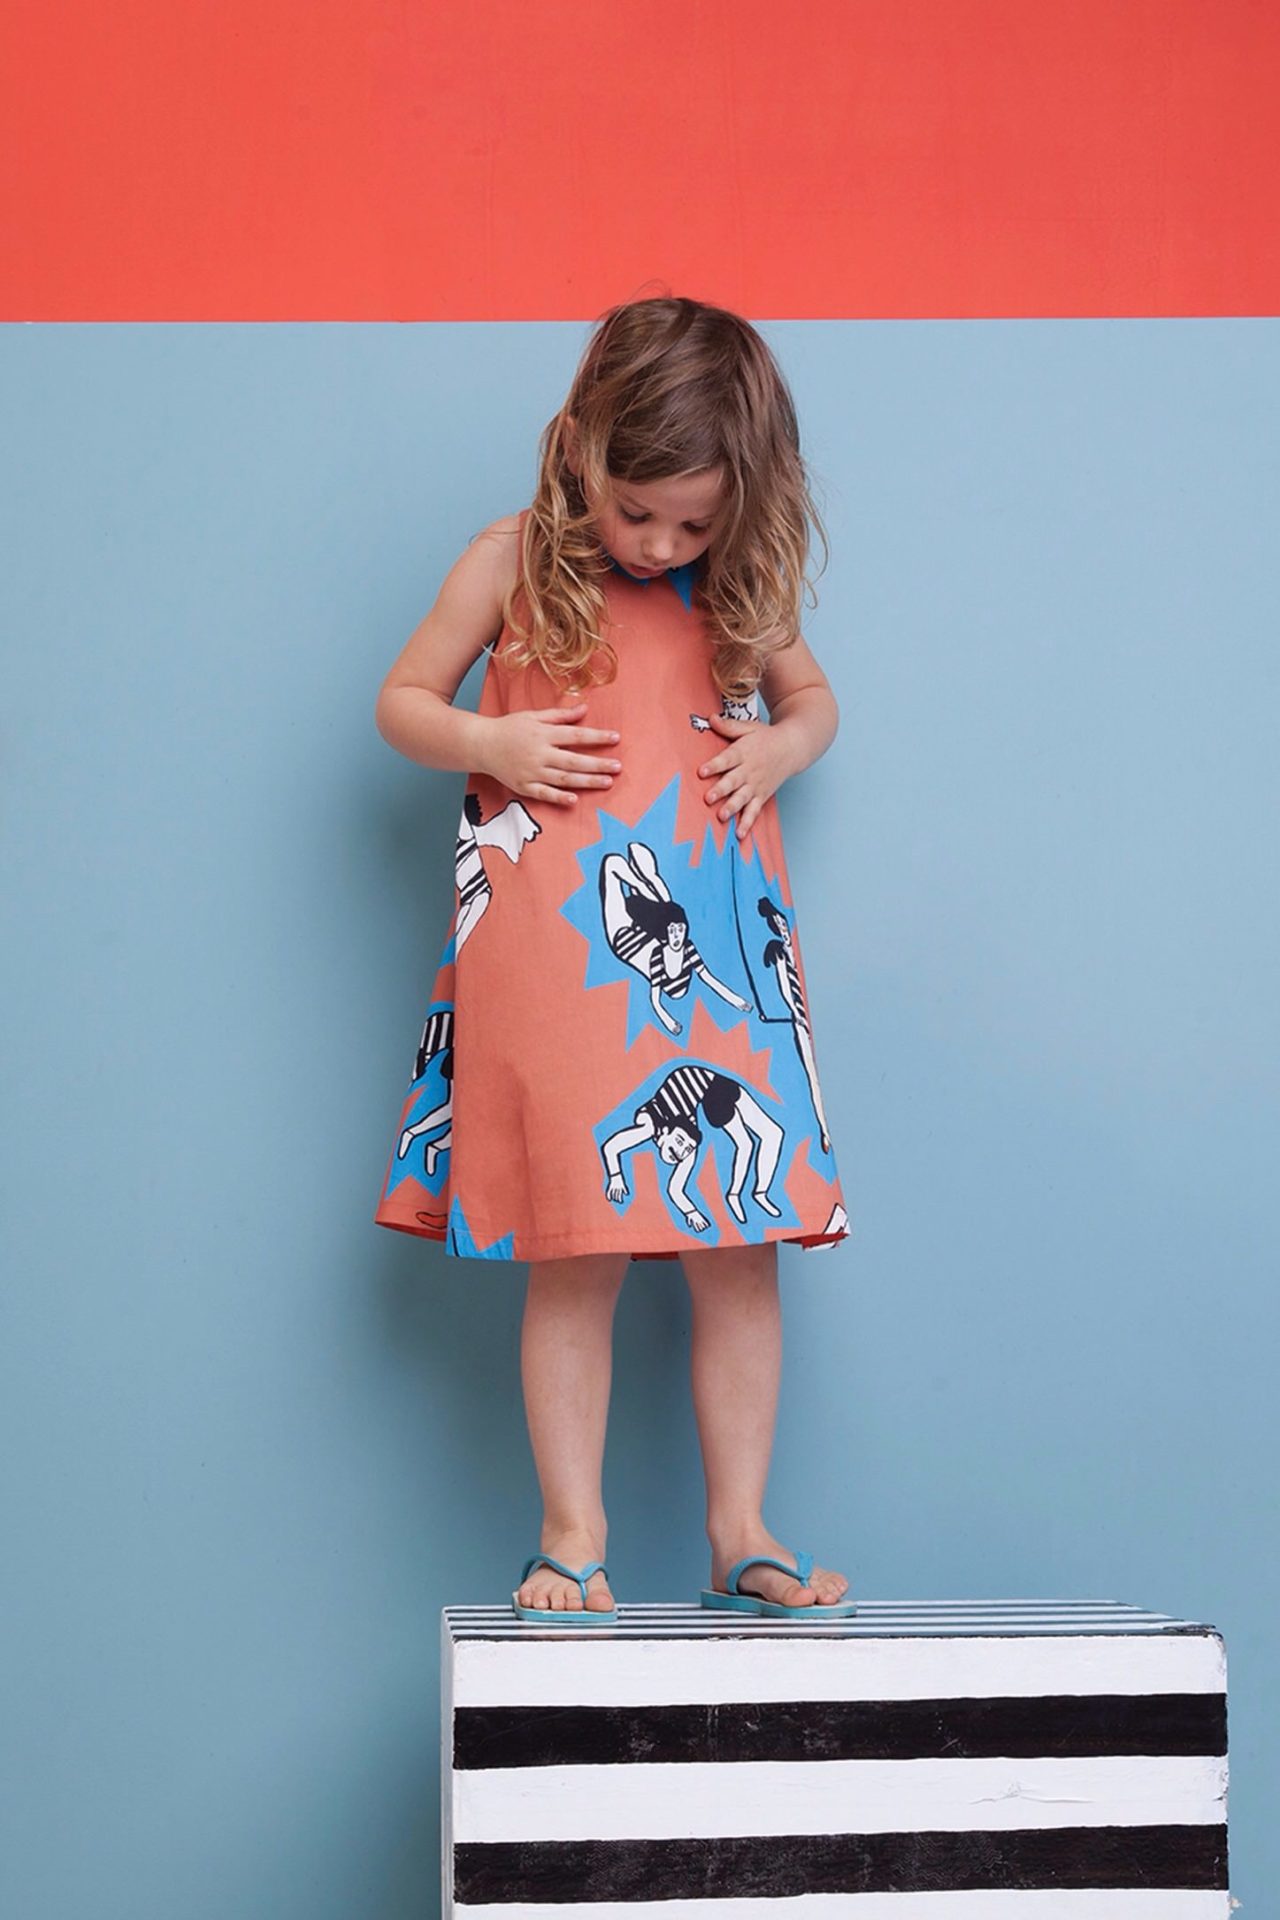 Wonderfull acrobat print by Lucy Kirk for Milk & Biscuits Spring 2017 kids fashion